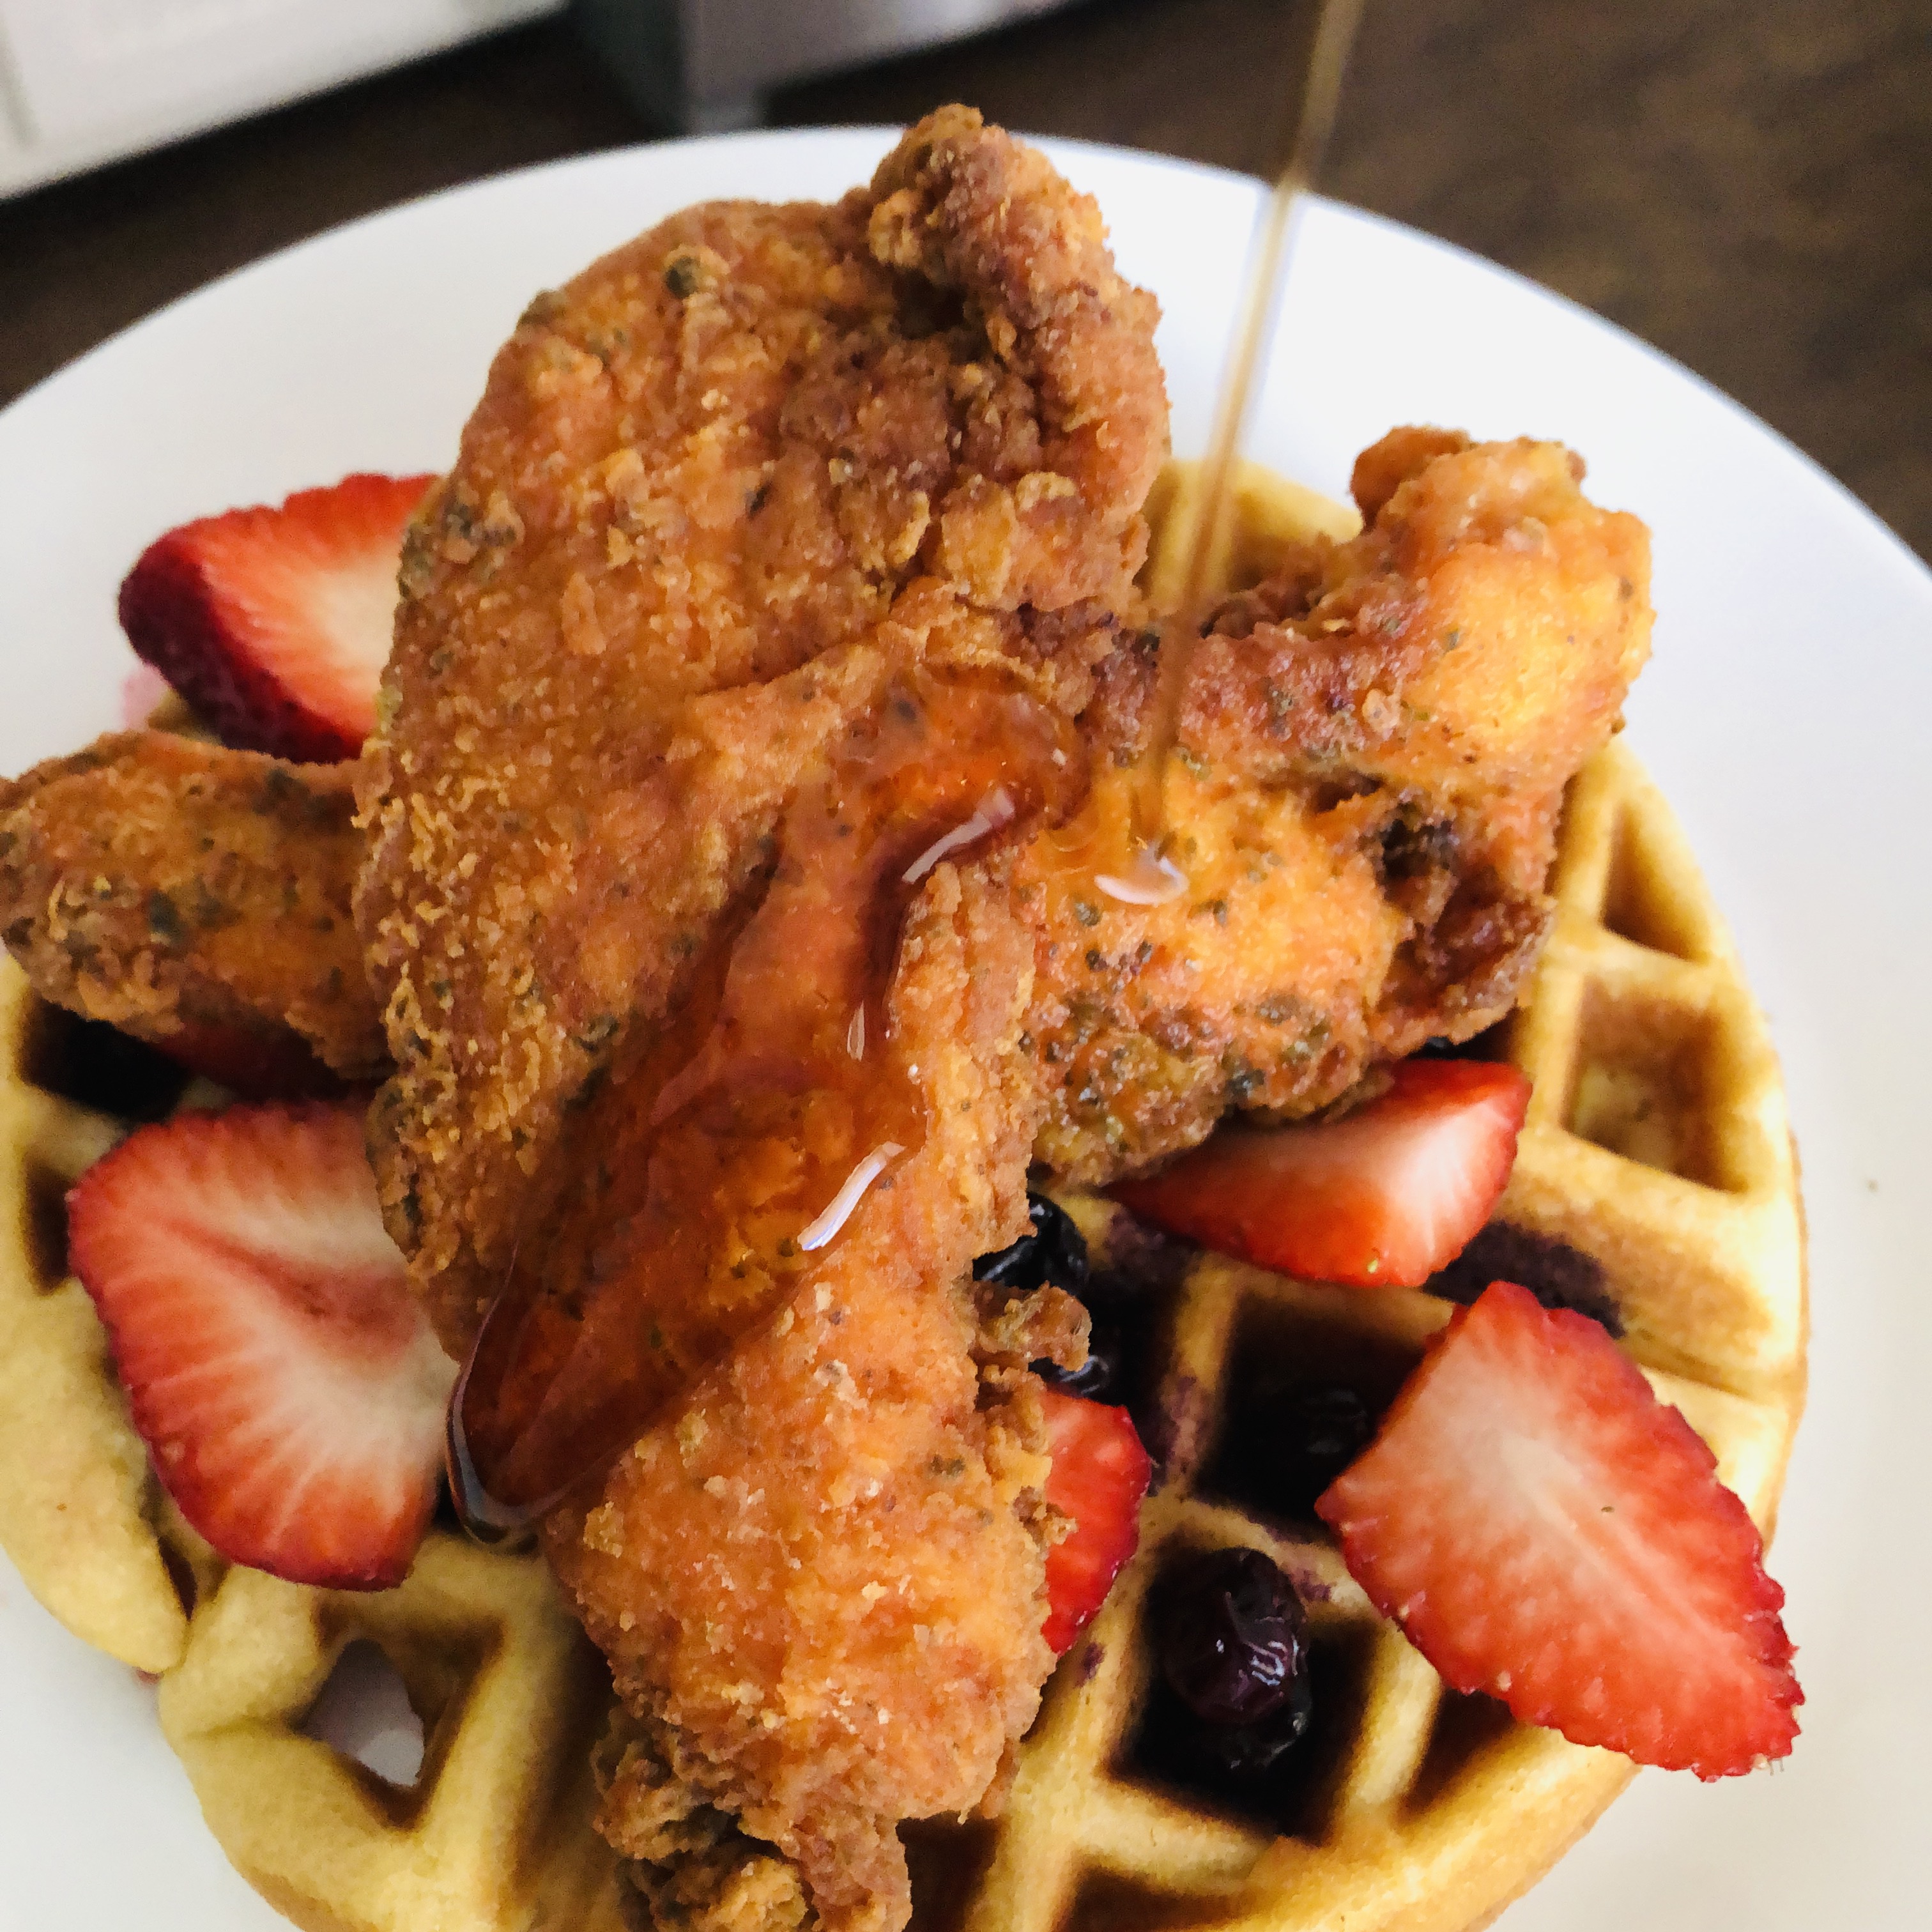 Belgian waffles topped with fresh strawberries and blueberries and fried chicken tenders with maple syrup being poured onto the stack.